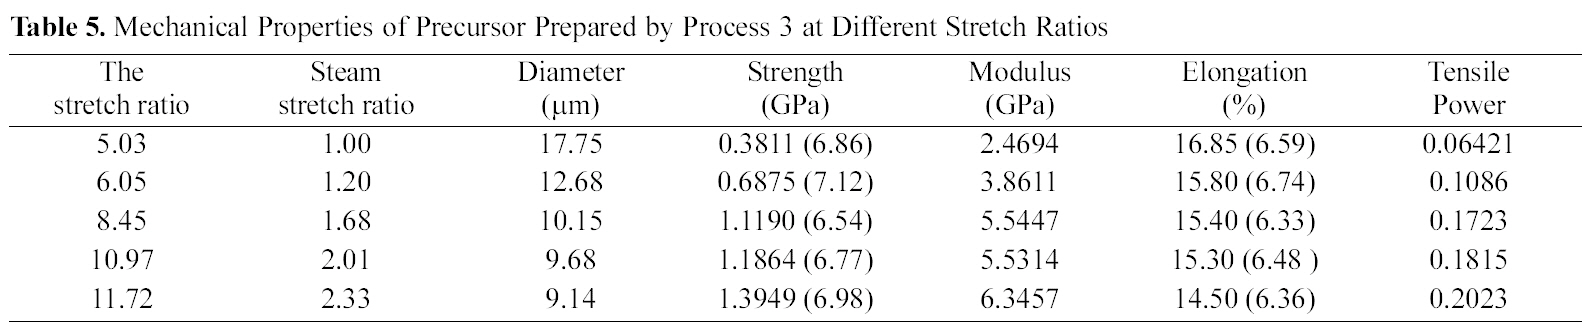 Mechanical Properties of Precursor Prepared by Process 3 at Different Stretch Ratios